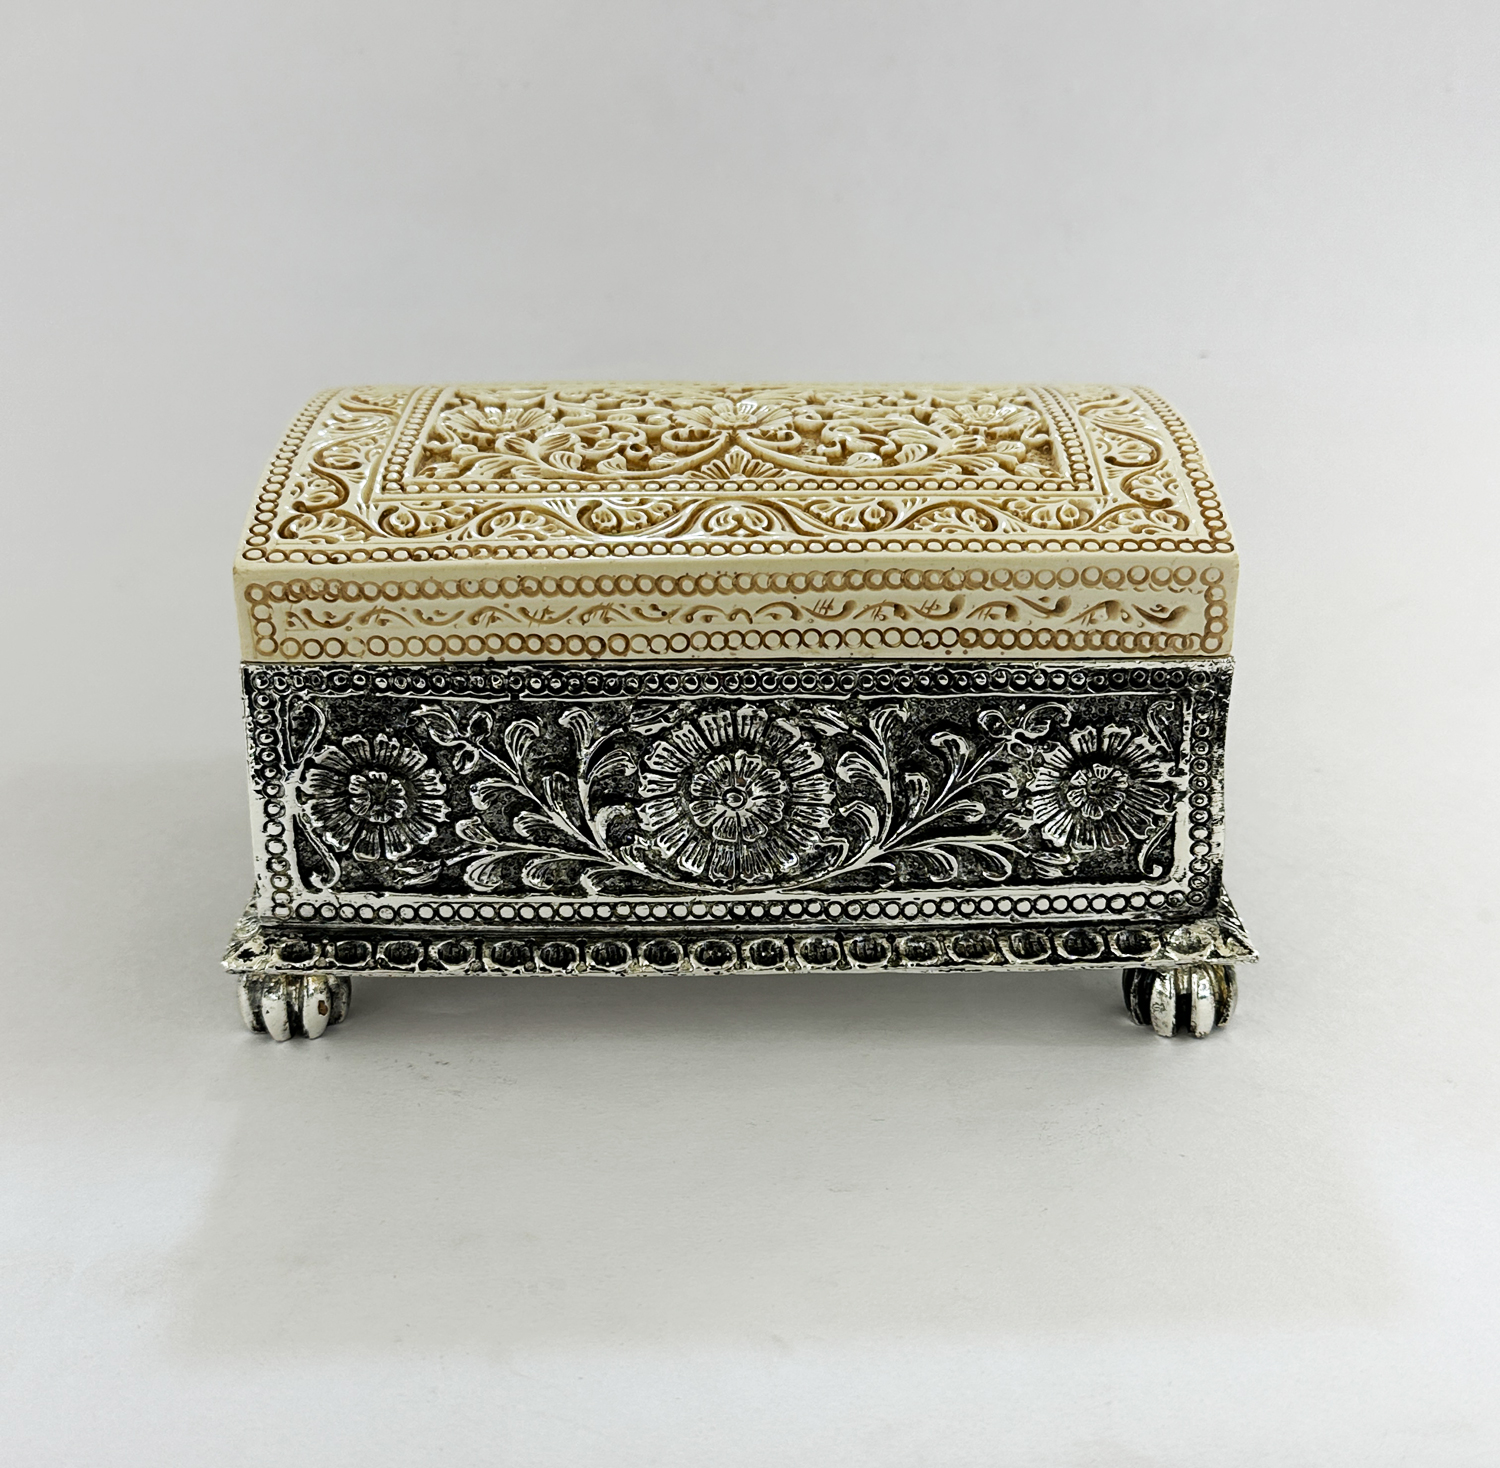 Antique Silver Box with Flowers Motif | 7 Inch